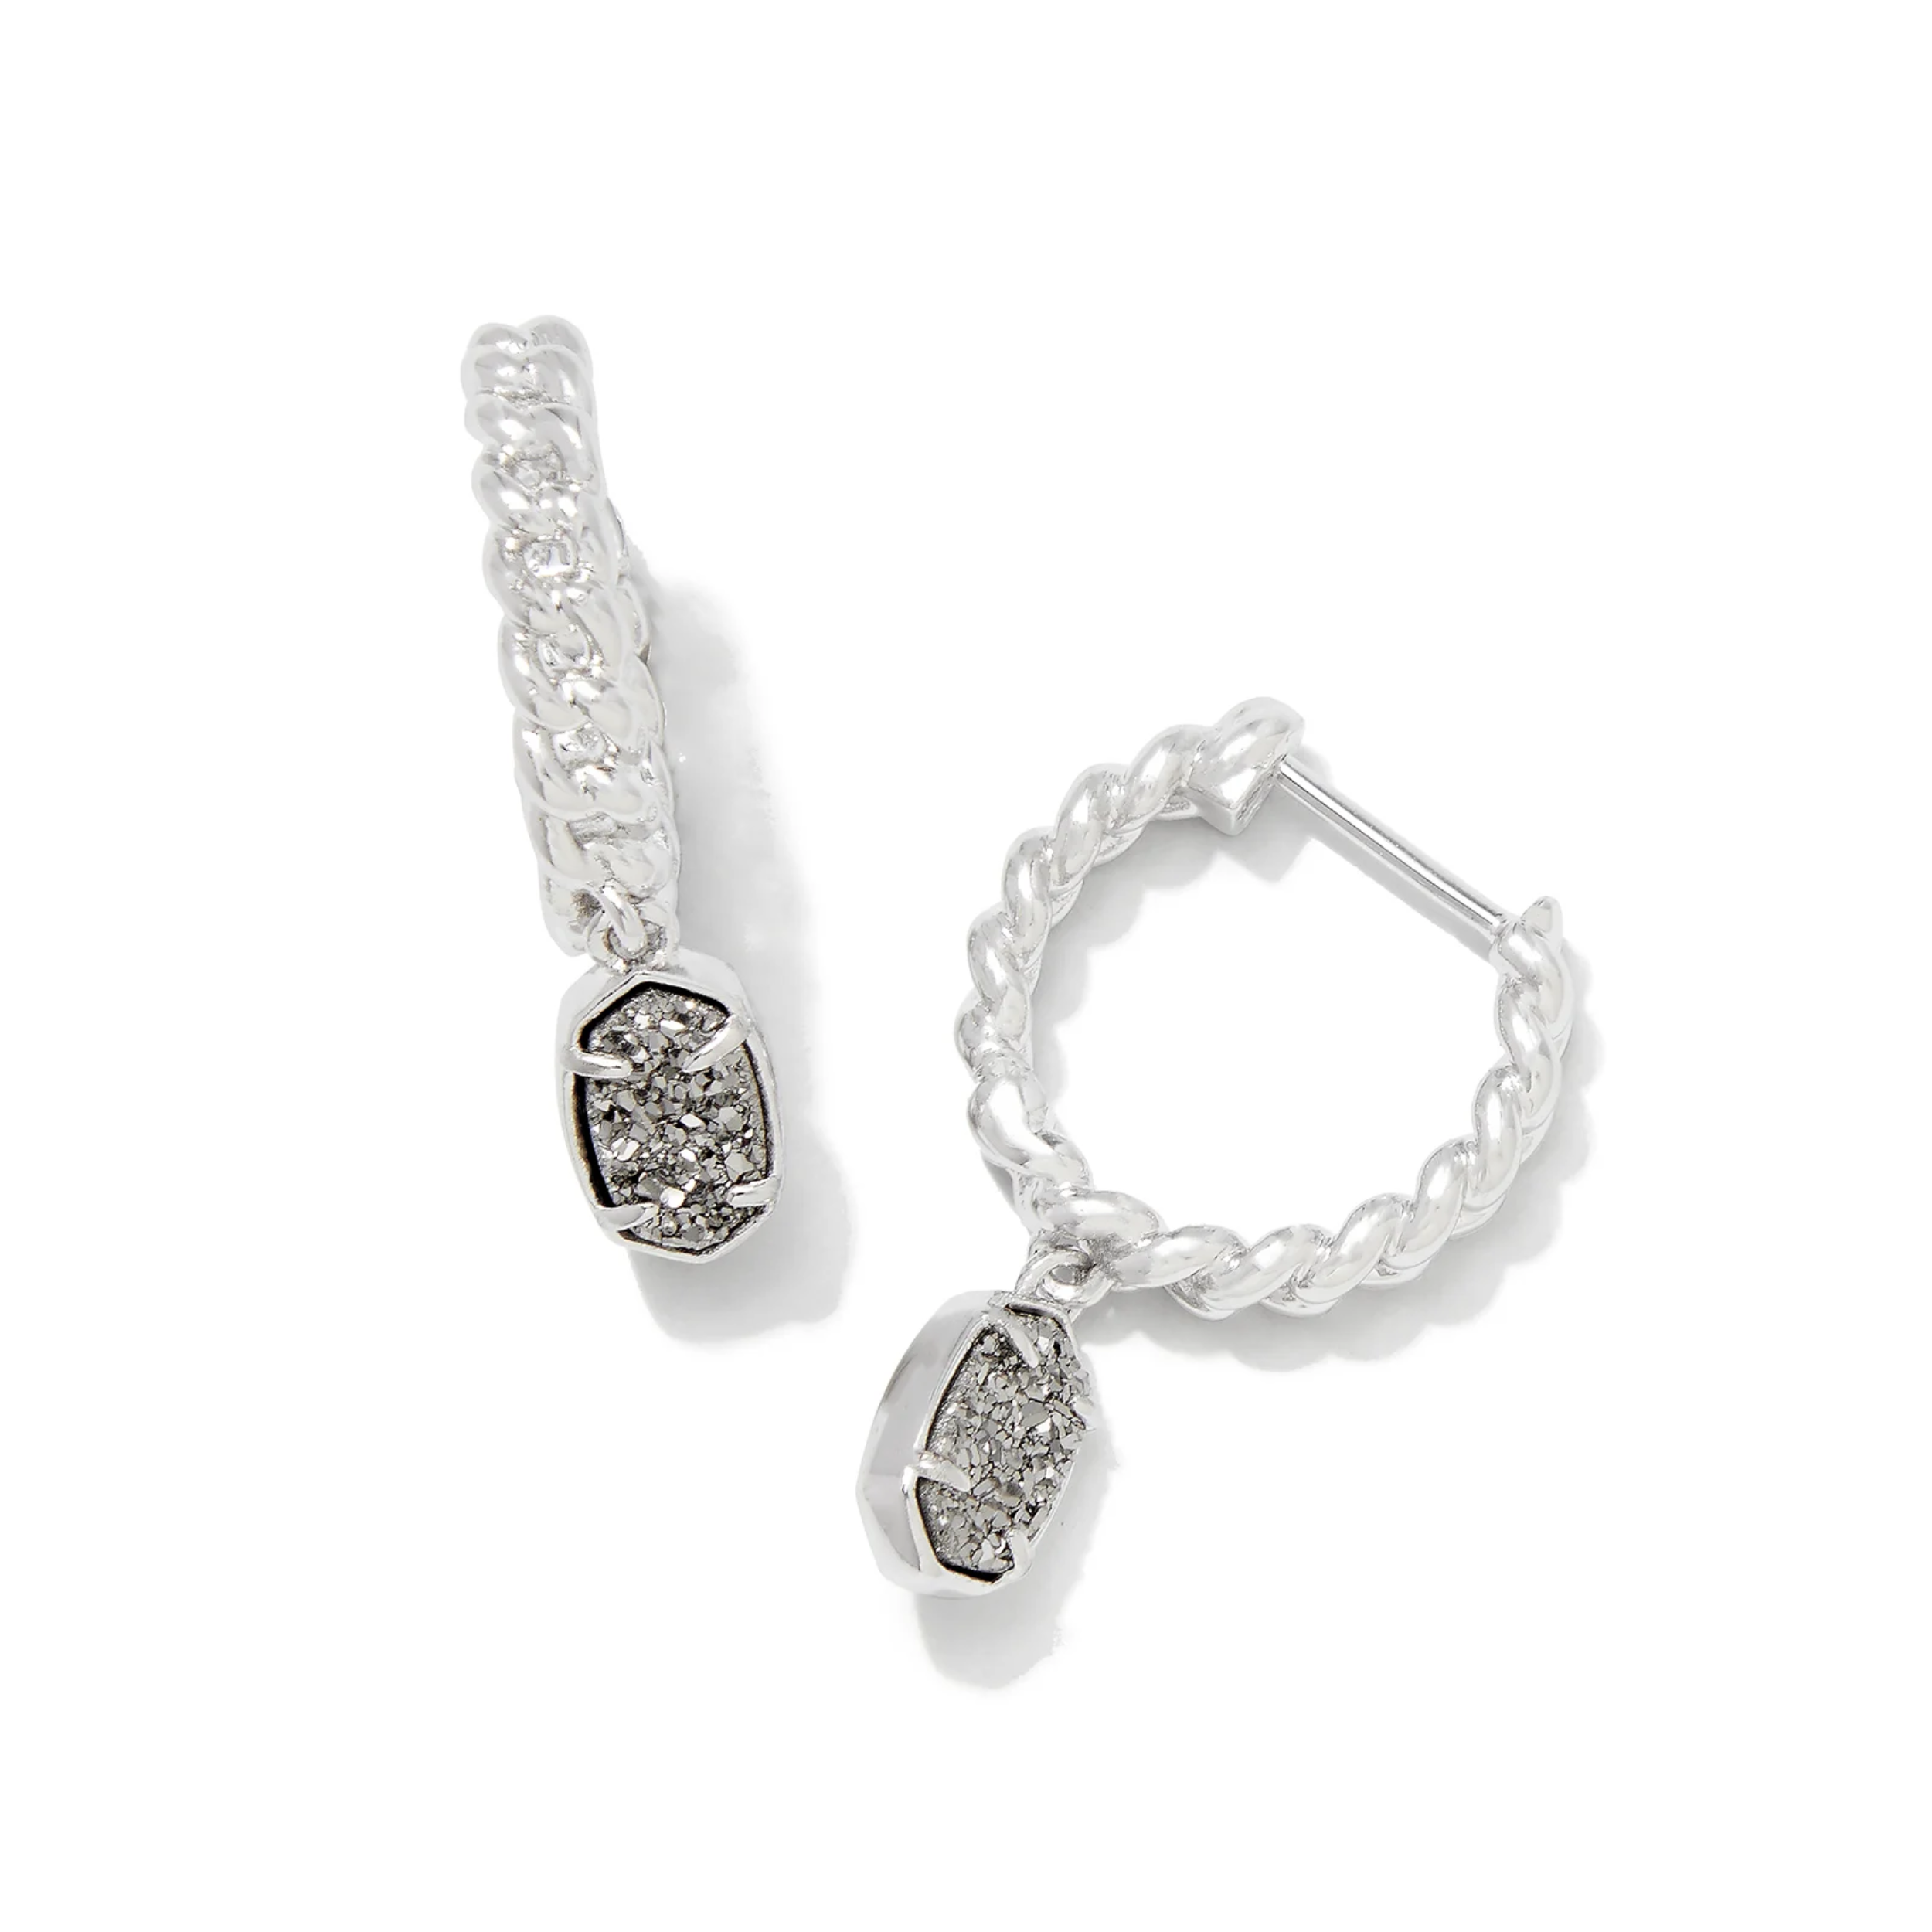 These Emilie Silver Huggie Earrings in Platinum Drusy by Kendra Scott are pictured on a white background.